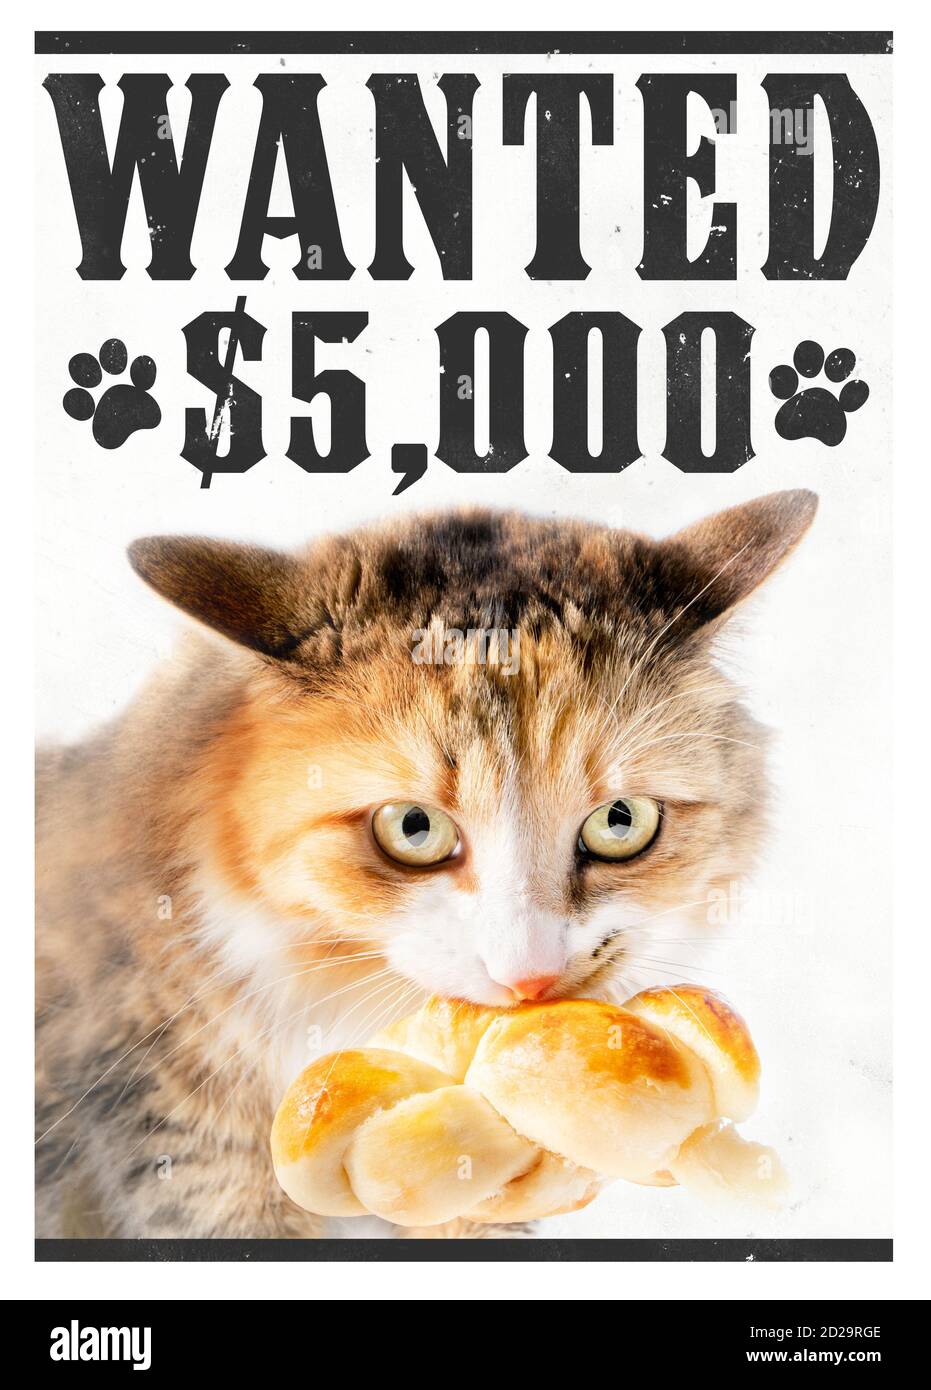 Pet themed wanted poster, mockup.  A cat bandit stealing food with text 'wanted $5000'. Western font with distressed texture on font and background. Stock Photo